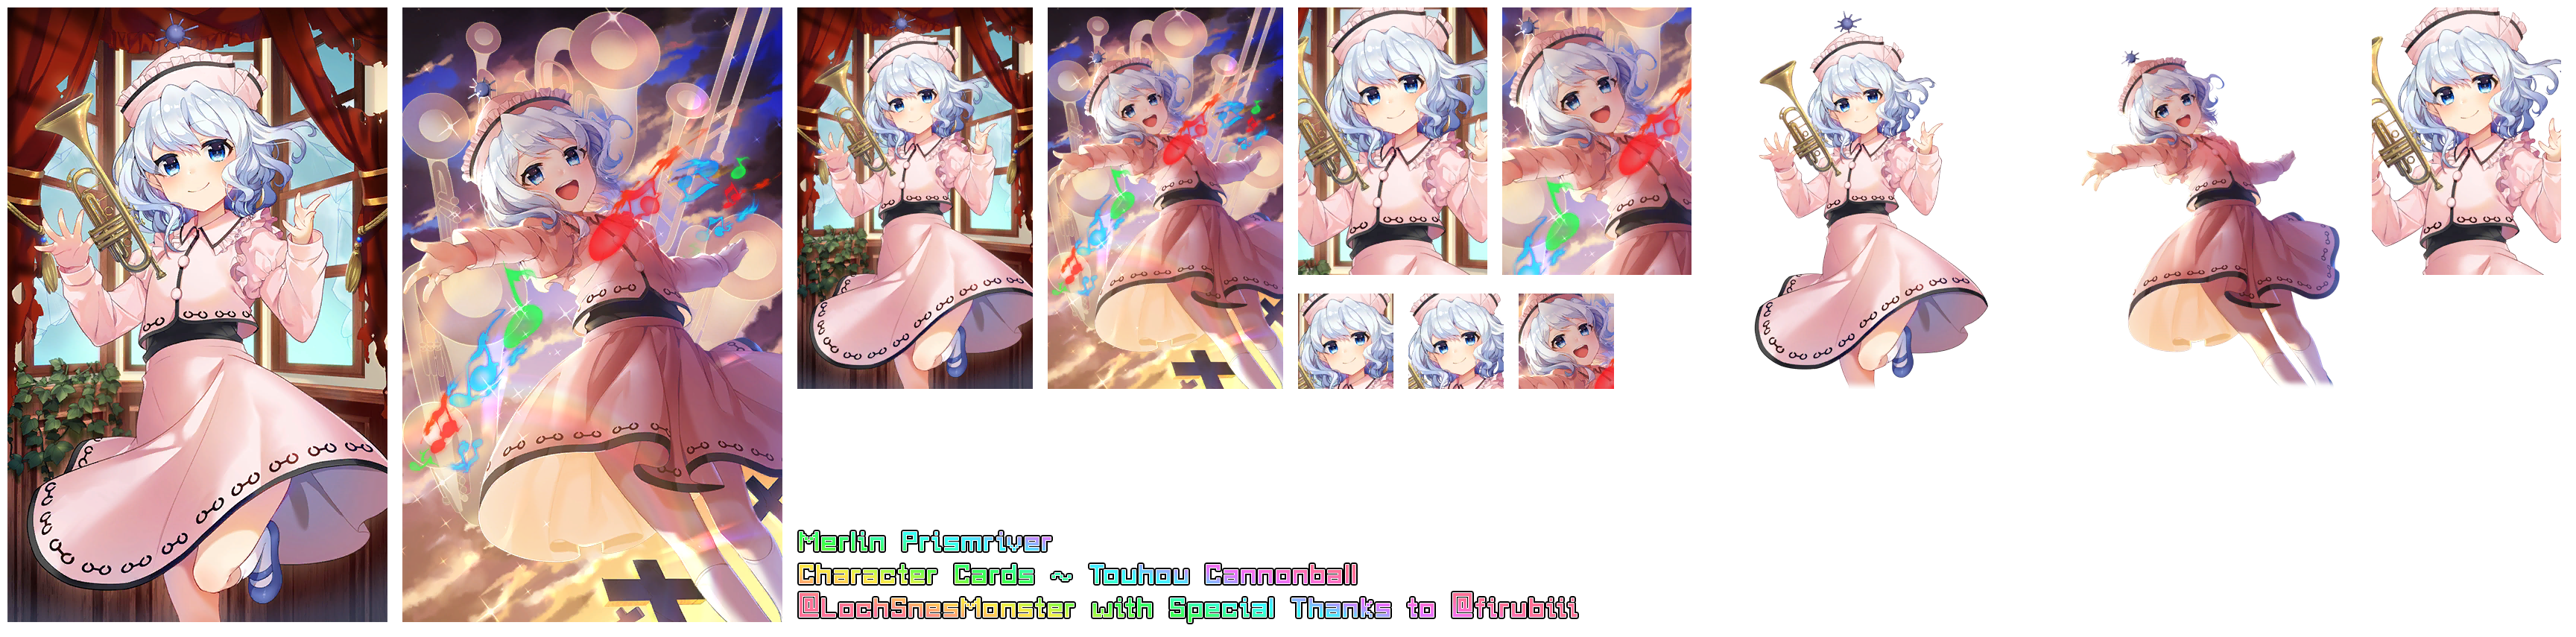 Touhou Cannonball - Merlin Prismriver